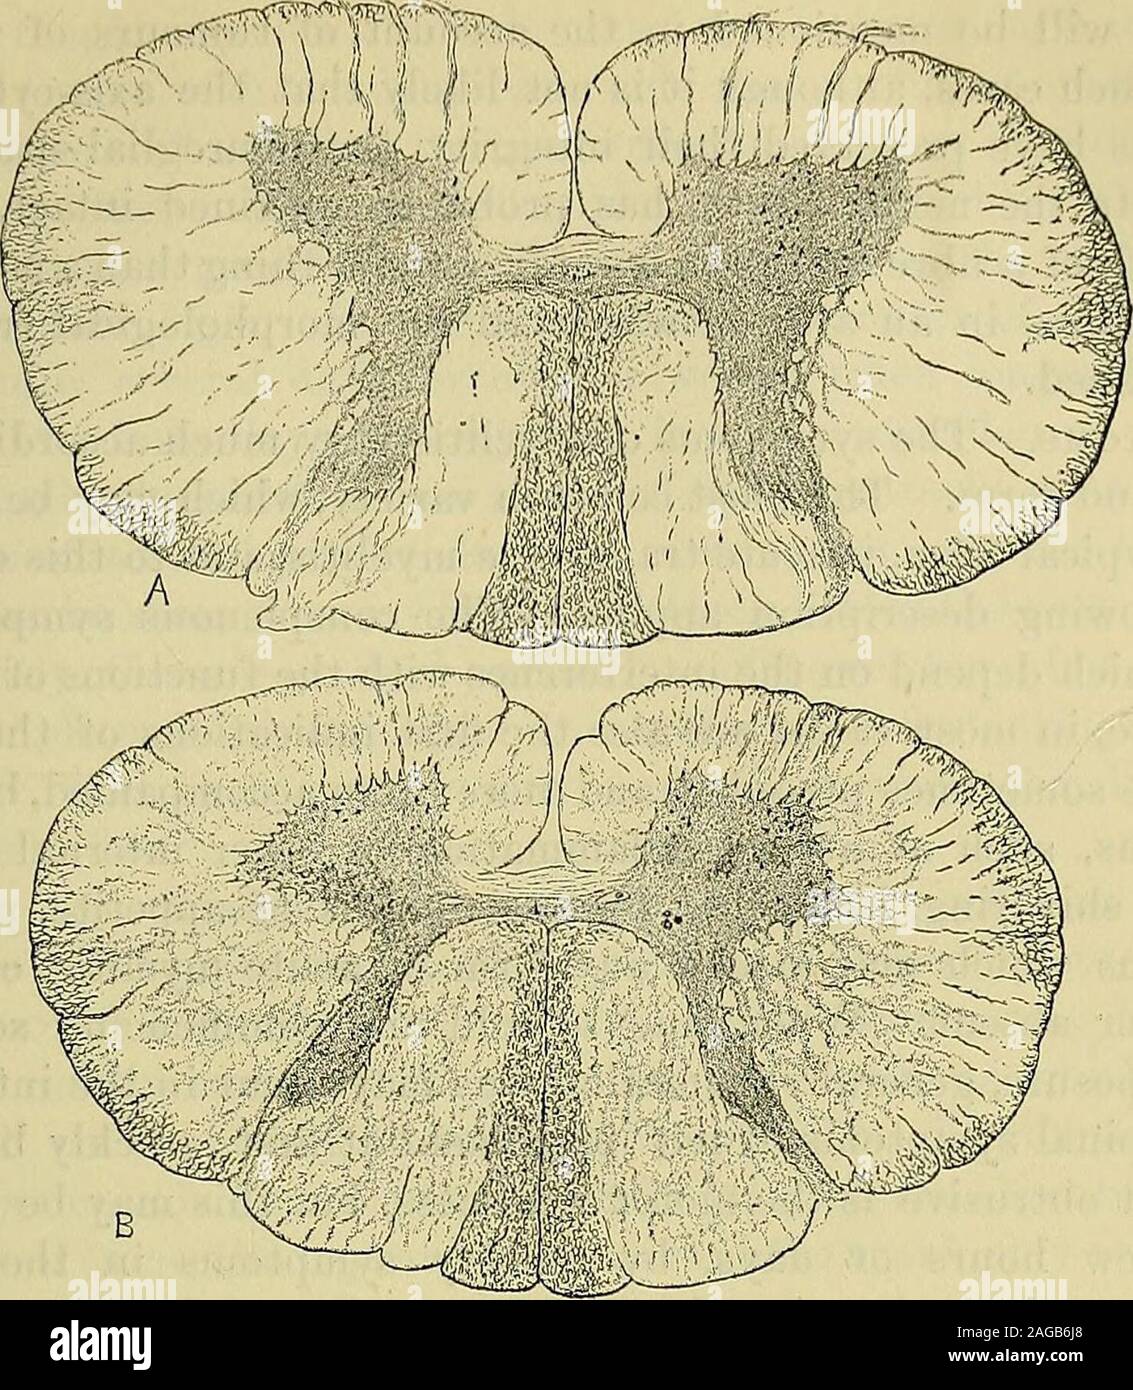 . A manual of diseases of the nervous system. fibres are smaller than anymet with in the normal cord. The appearance is as if there hadbeen an irregular ascending myelitis, which had extended up thecord as high as between the seventh and eighth cervical segments,and from the lower extremity of the normal fibres there had occurreda growth of new fibies such as effects the regeneration of nerves.*We seem to have here an actual process of renewal of fibres that hadbeen destroyed by such inflammation as has caused the empty spacesin the vicinity. If this is a correct interpretation of the appearan Stock Photo